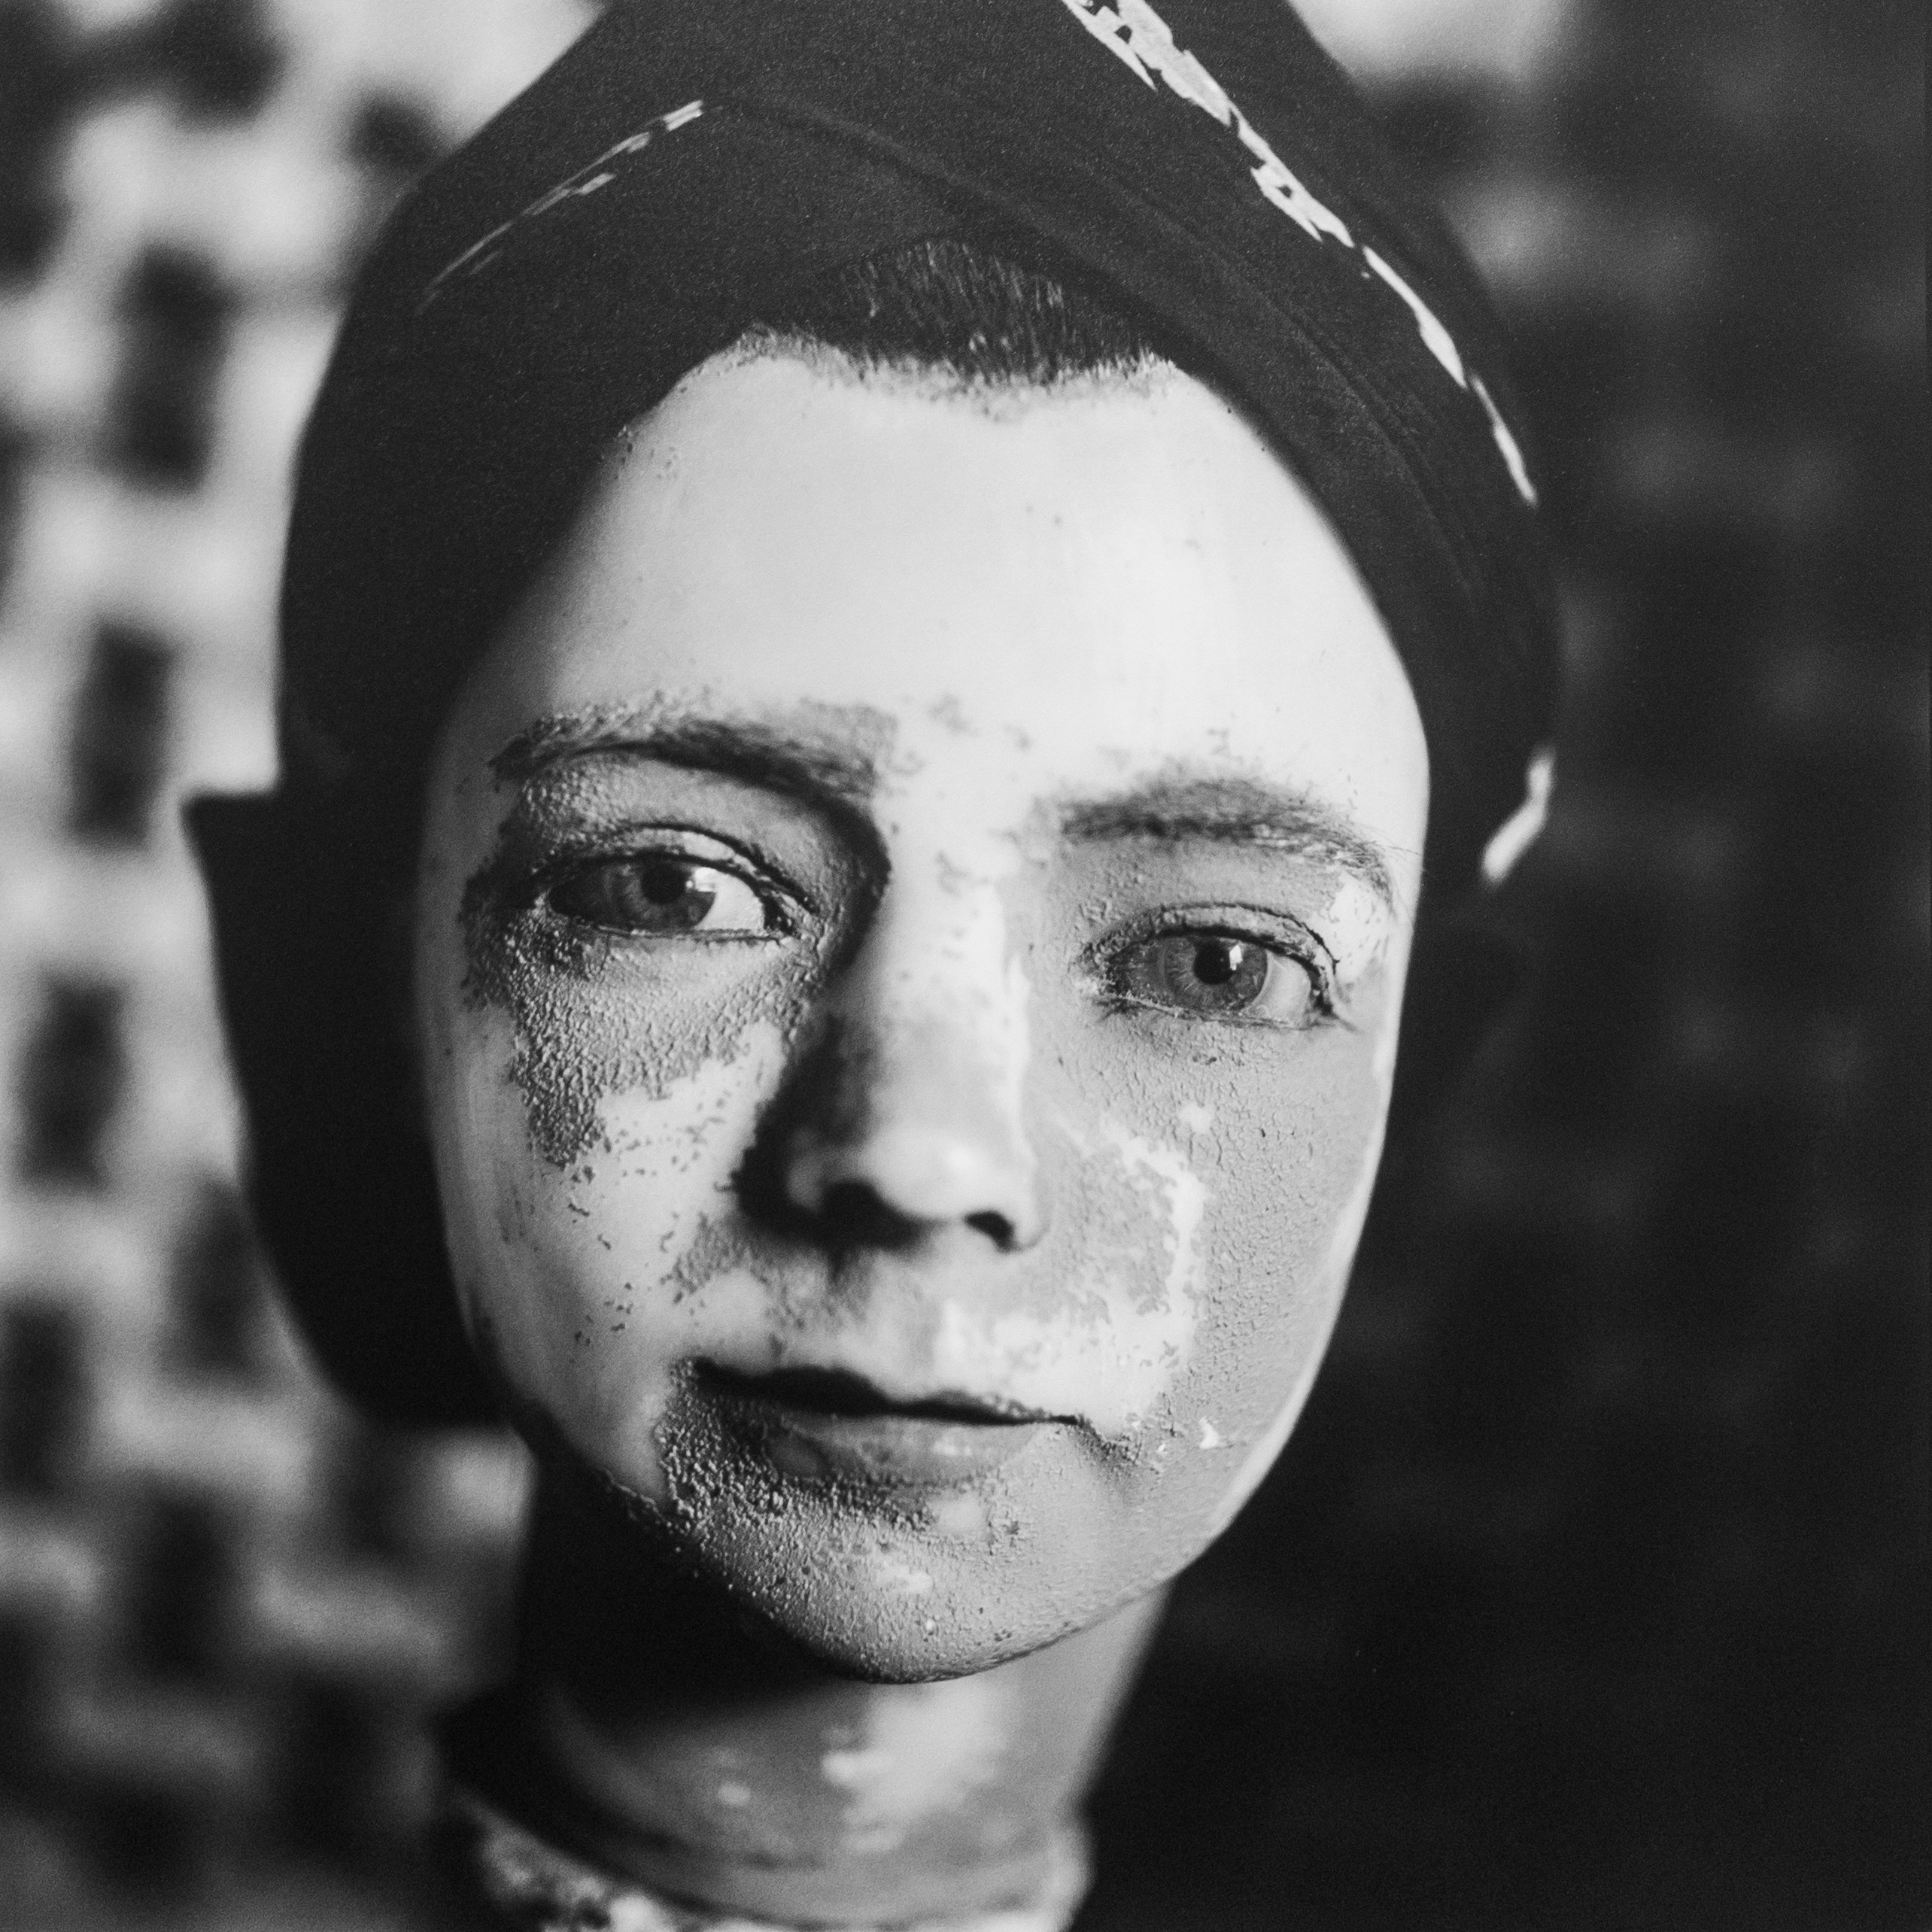 Keith Carter, Wax Boy with Turban, 1995, Catherine Couturier Gallery